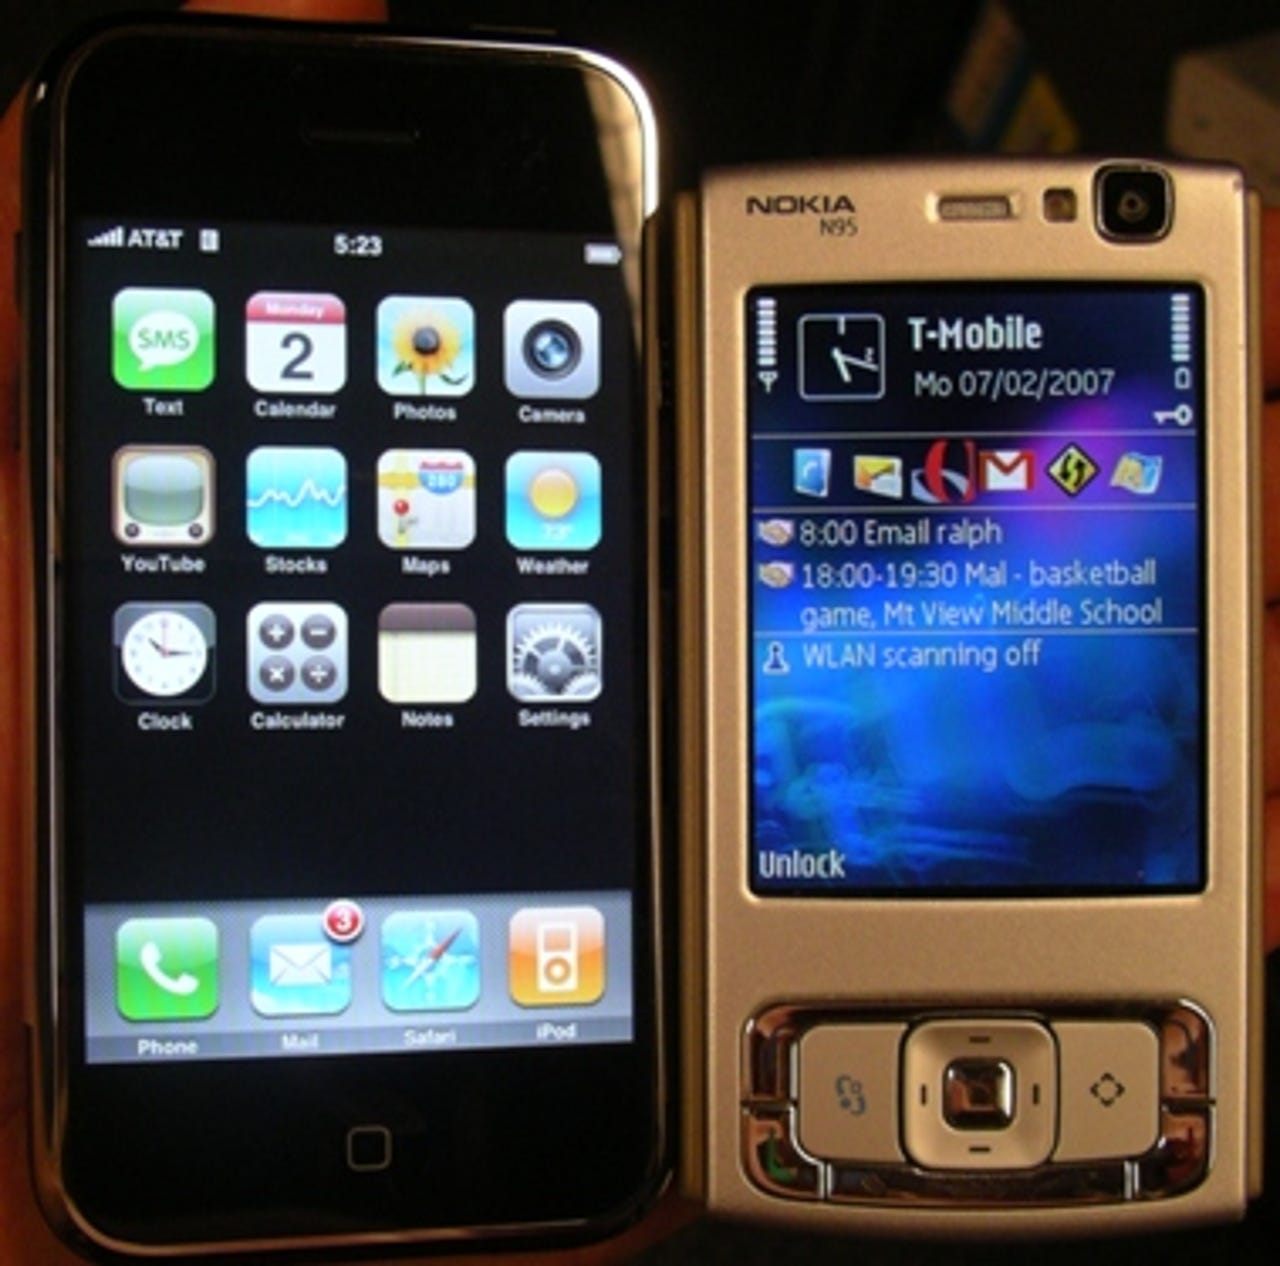 Apple iPhone and Nokia N95